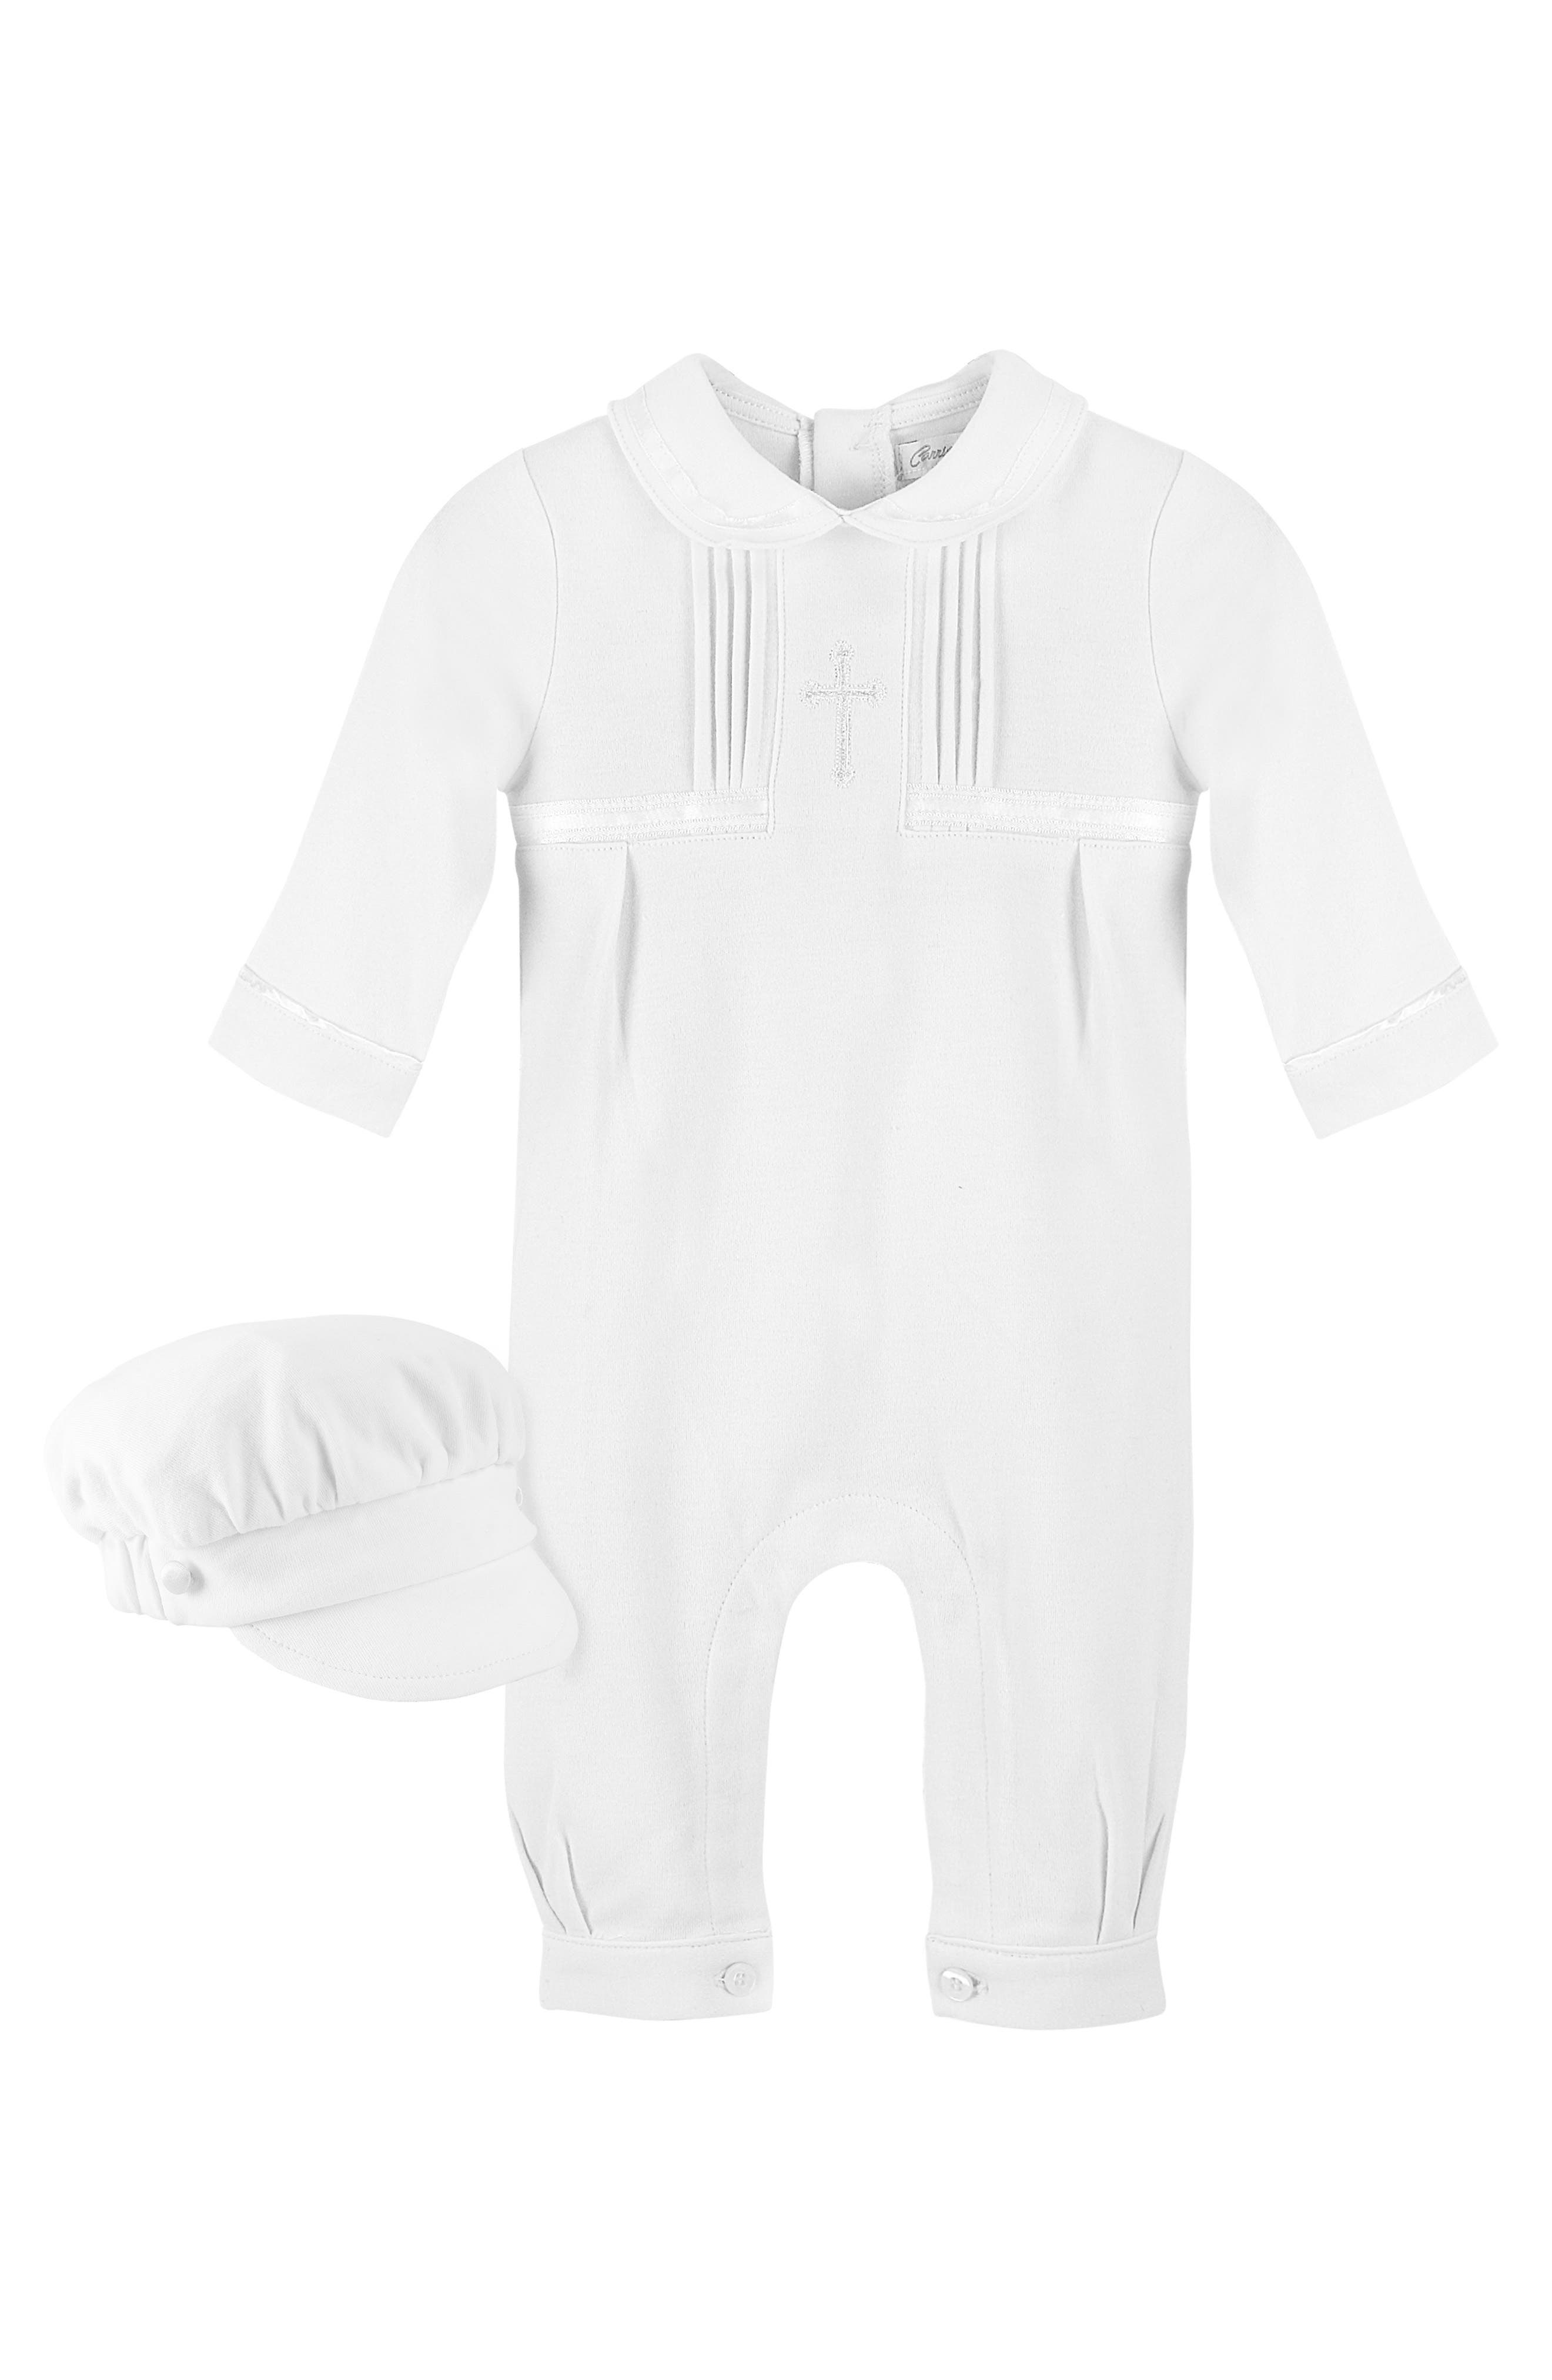 boutique baby gowns